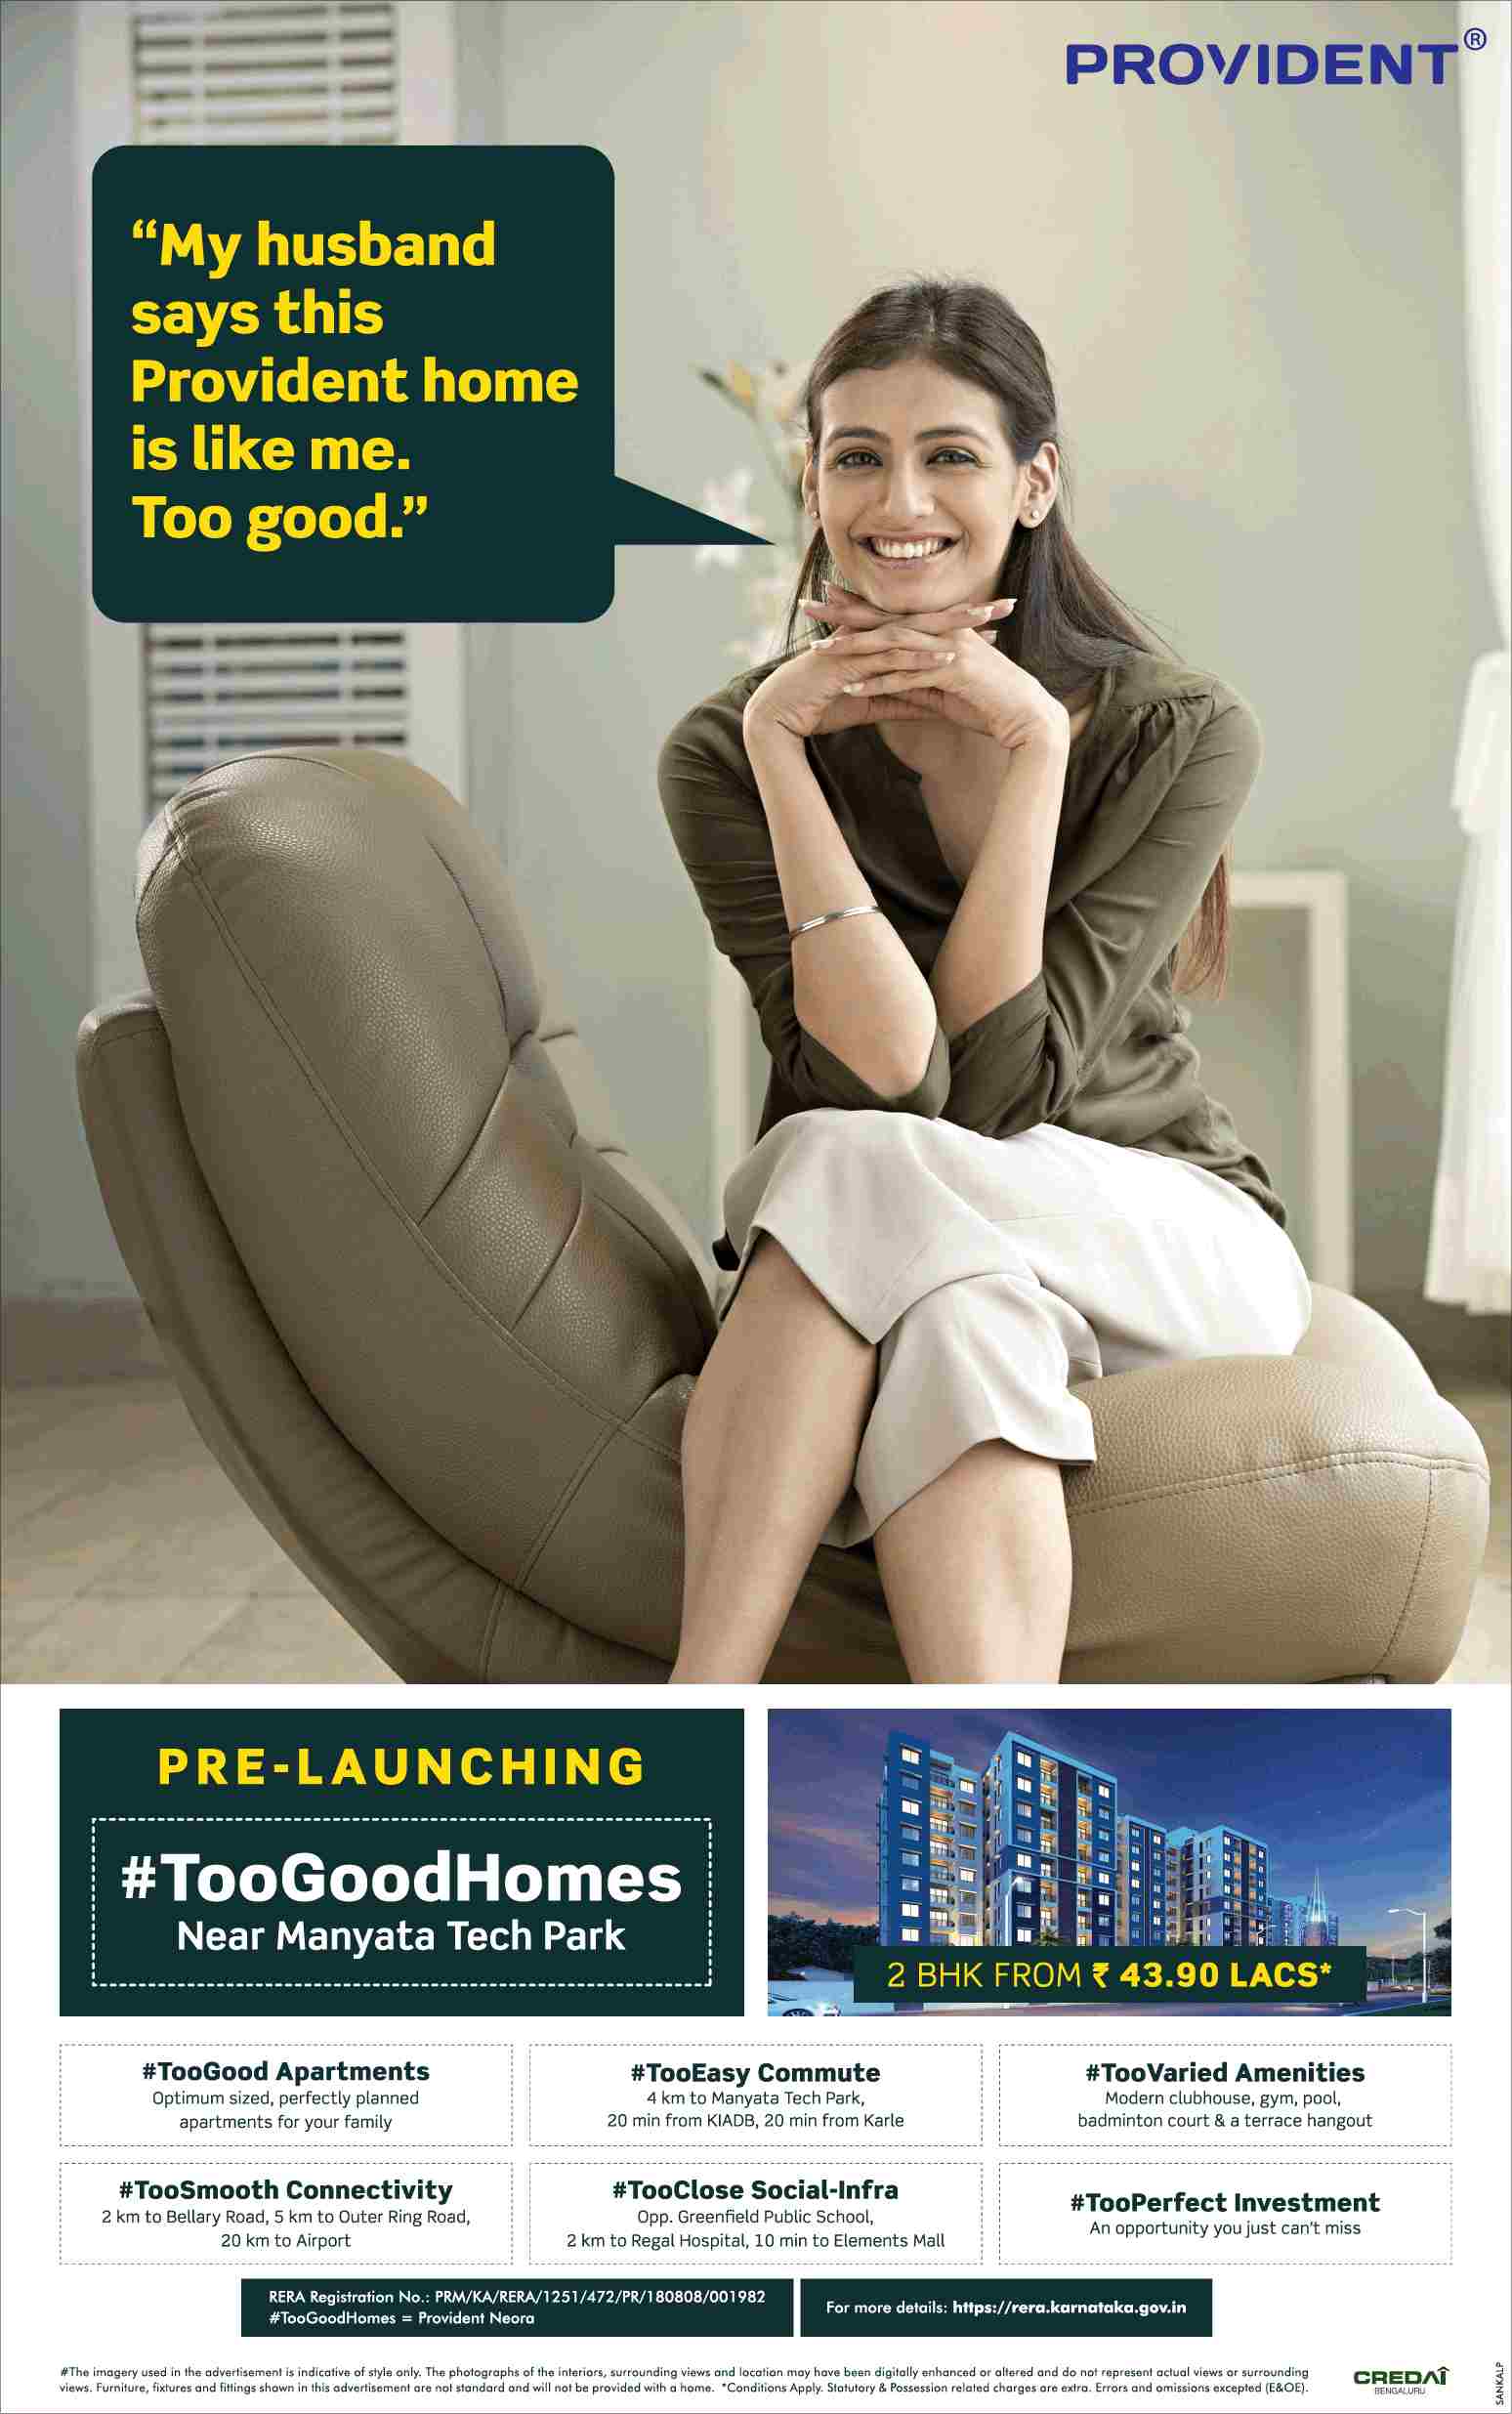 Book 2 BHK @ Rs 43.90 Lacs at Provident Too Good Homes in Bangalore Update